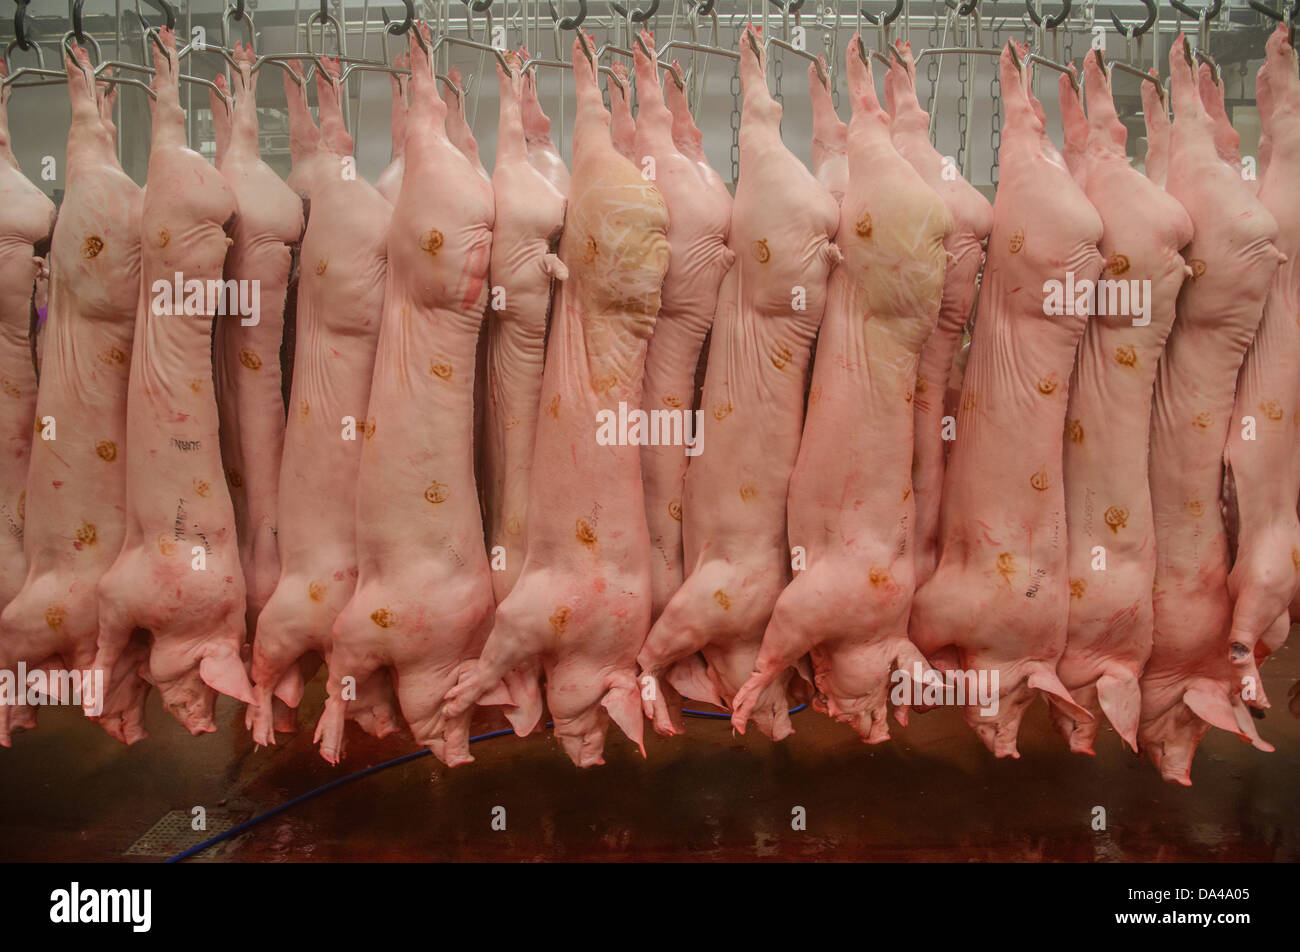 Pig carcases hanging in abattoir, Yorkshire, England, February Stock Photo